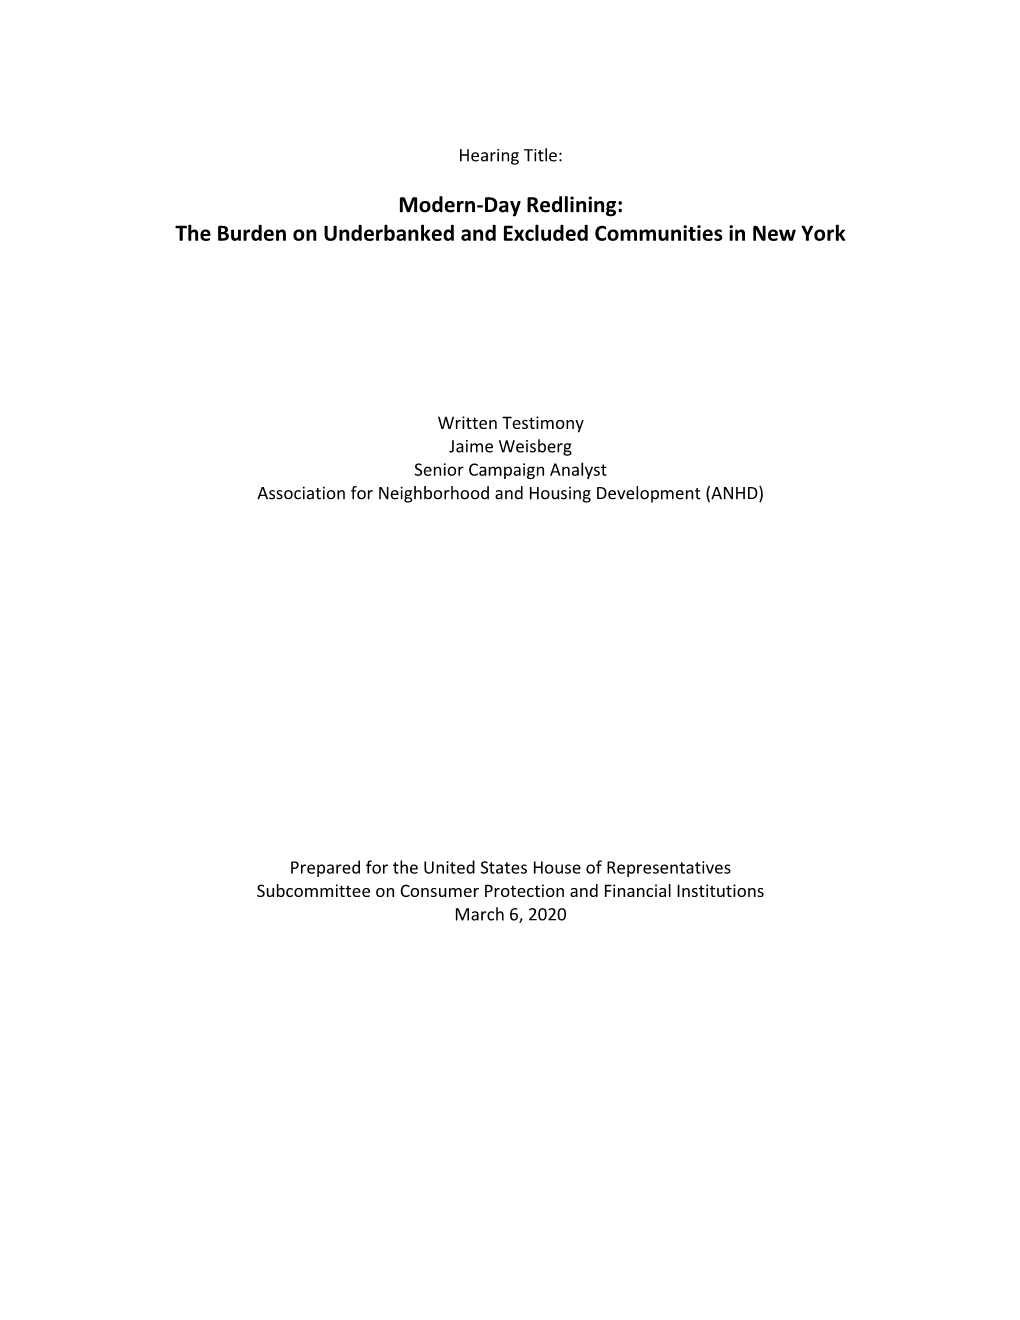 Modern-Day Redlining: the Burden on Underbanked and Excluded Communities in New York